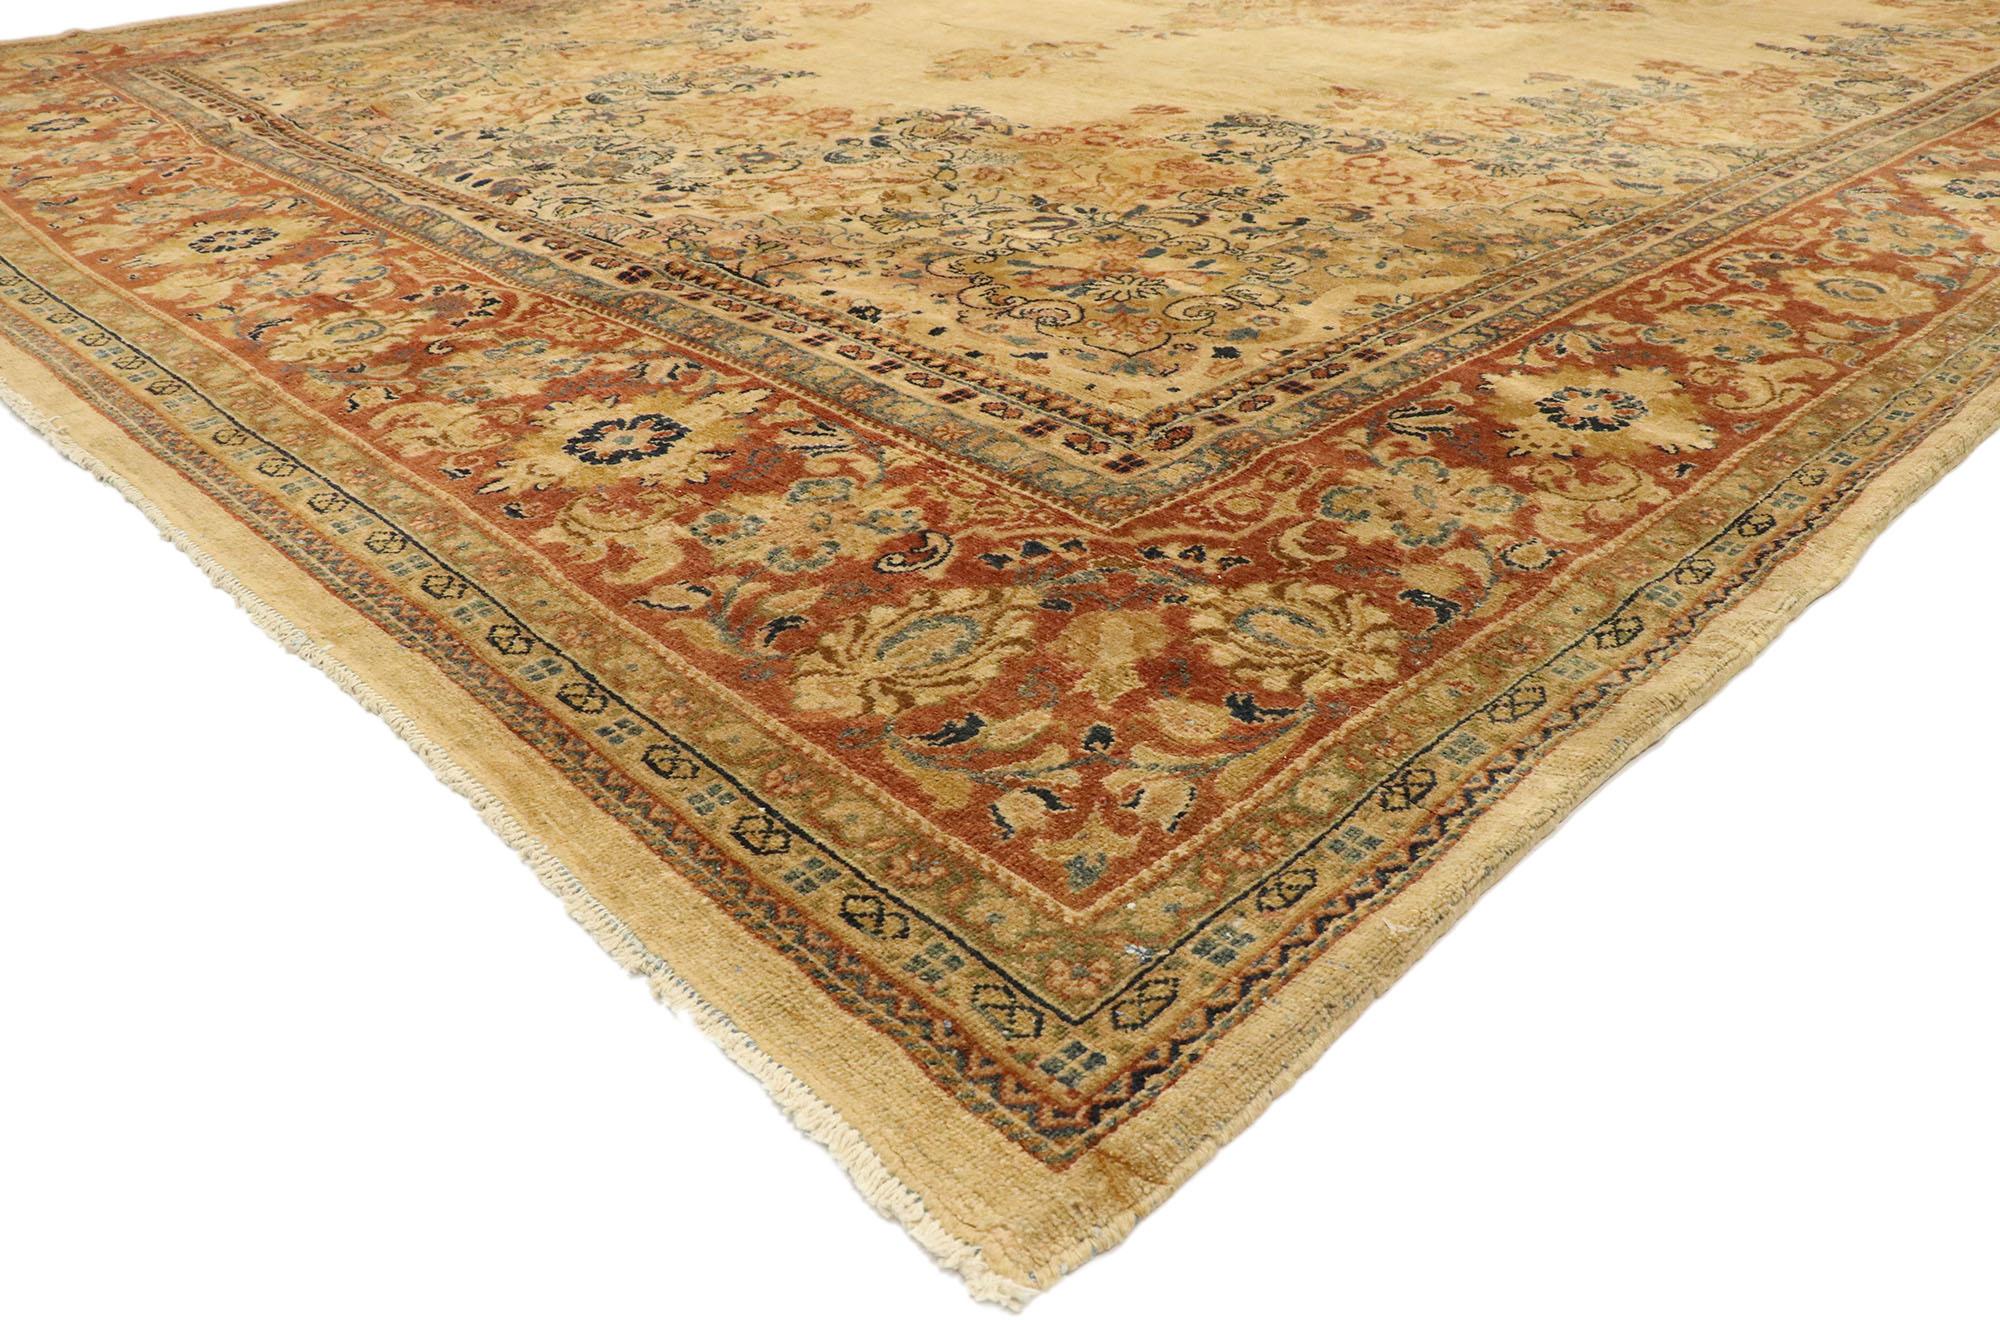 73329 antique Persian Mahal rug with Rustic Shaker style 12'00 x 19'05. With ornate details and well-balanced symmetry combined with a neutral color palette, this hand knotted wool antique Persian Mahal palace rug beautifully embodies rustic Shaker